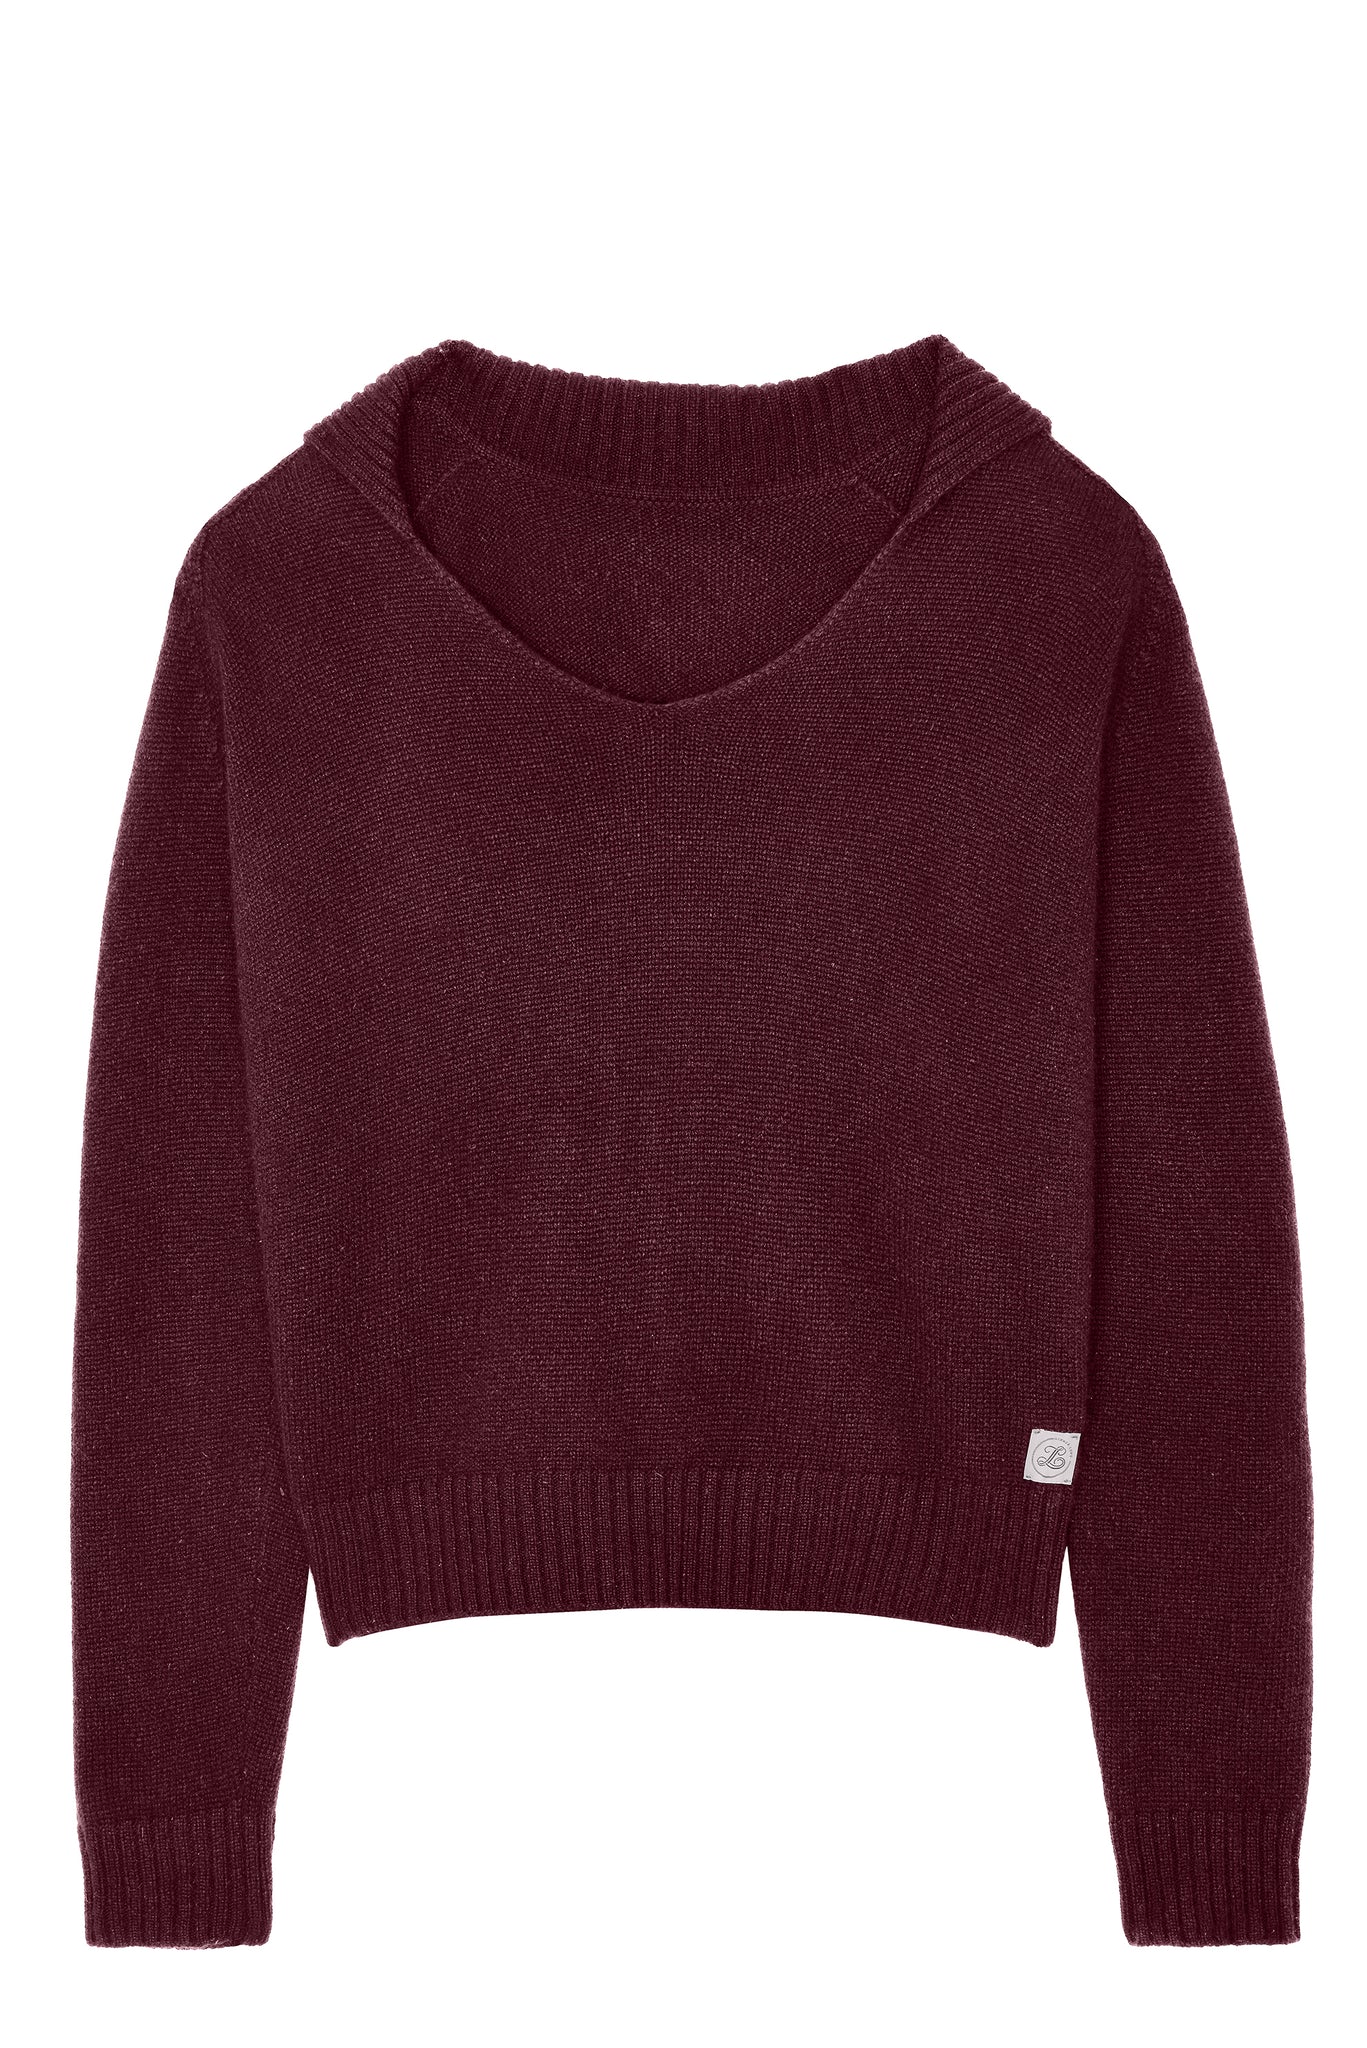 Wine red/bordeaux unisex cashmere sweater featuring a v-neckline, ribbed collar, loose fitting.